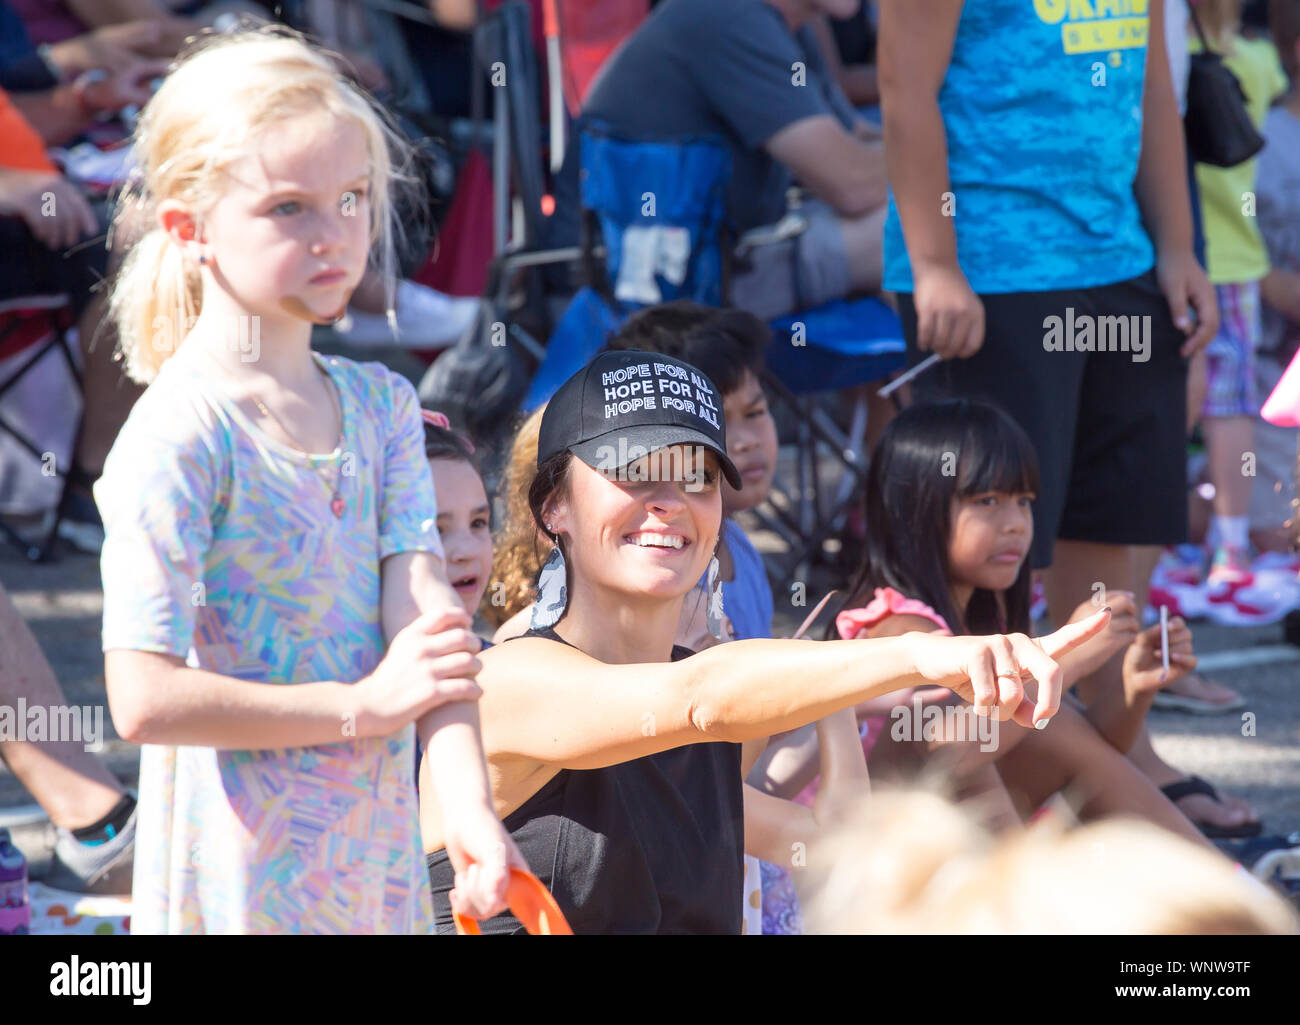 MATTHEWS, NC (USA) - August 31, 2019: Enthusiastic spectators watch the Labor Day parade held at the annual 'Matthews Alive' community festival. Stock Photo